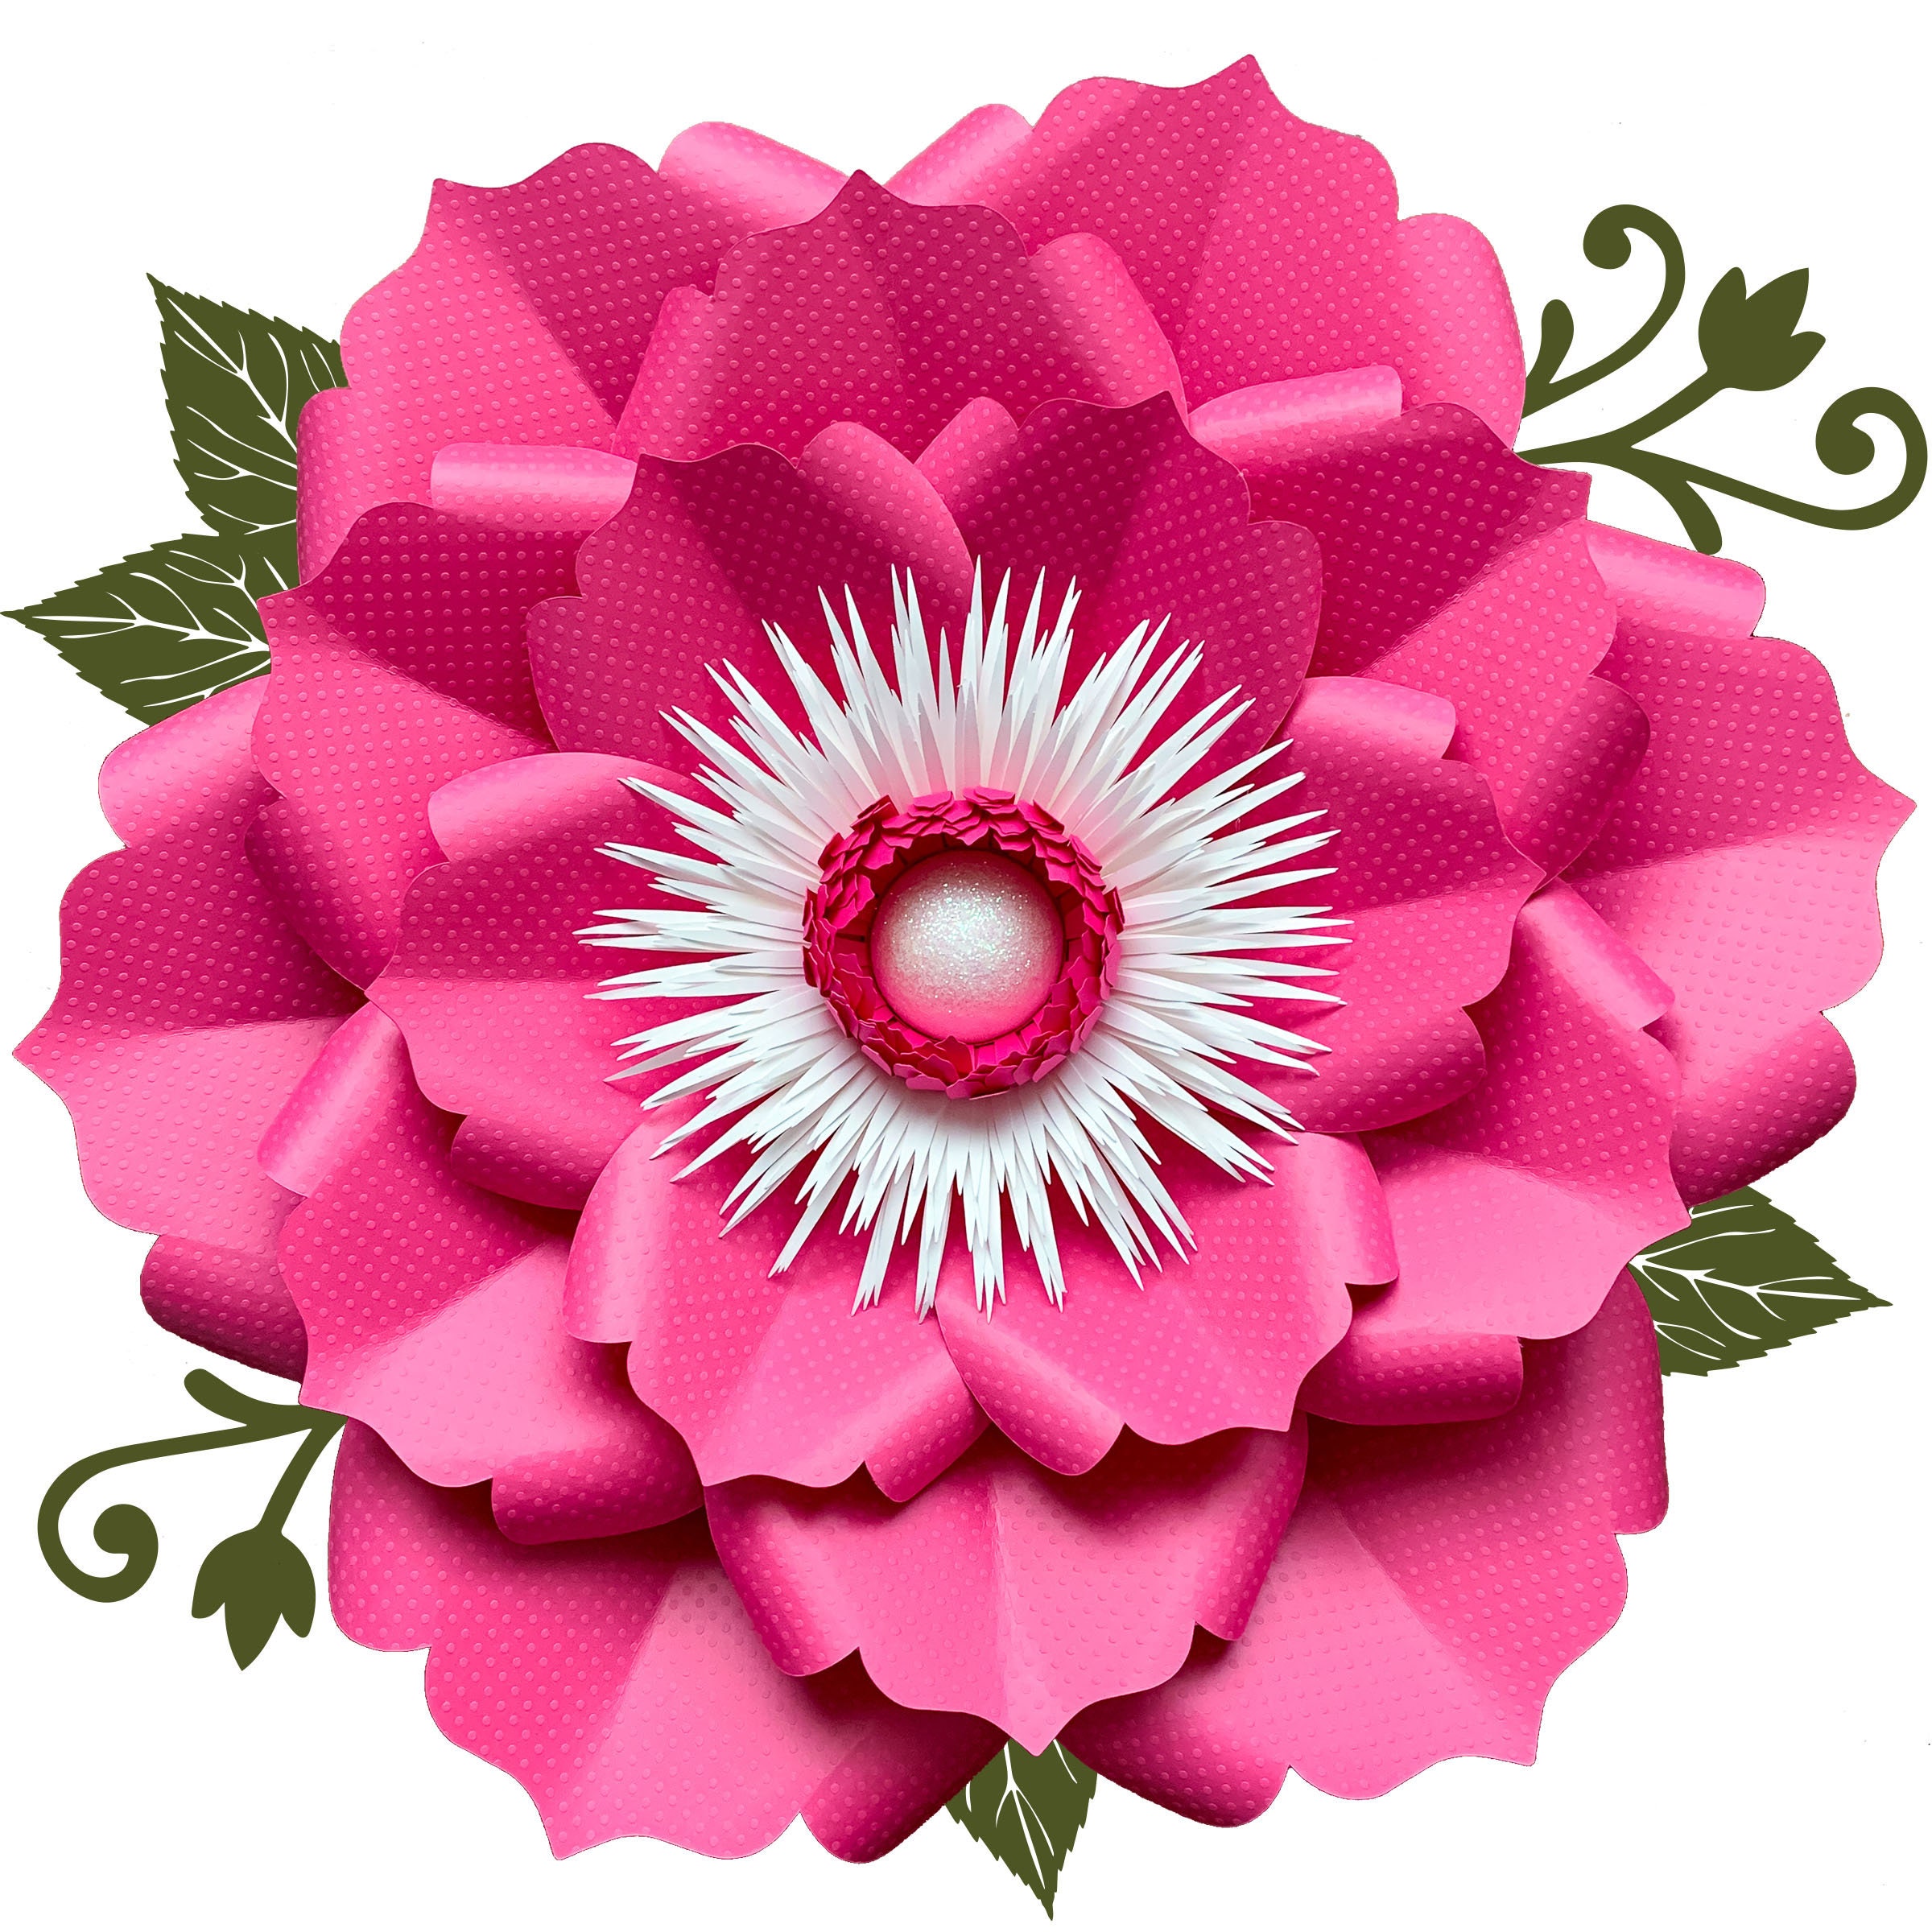 Download SVG PNG DXF Petal 22 Paper Flowers Template Flat Centers ...